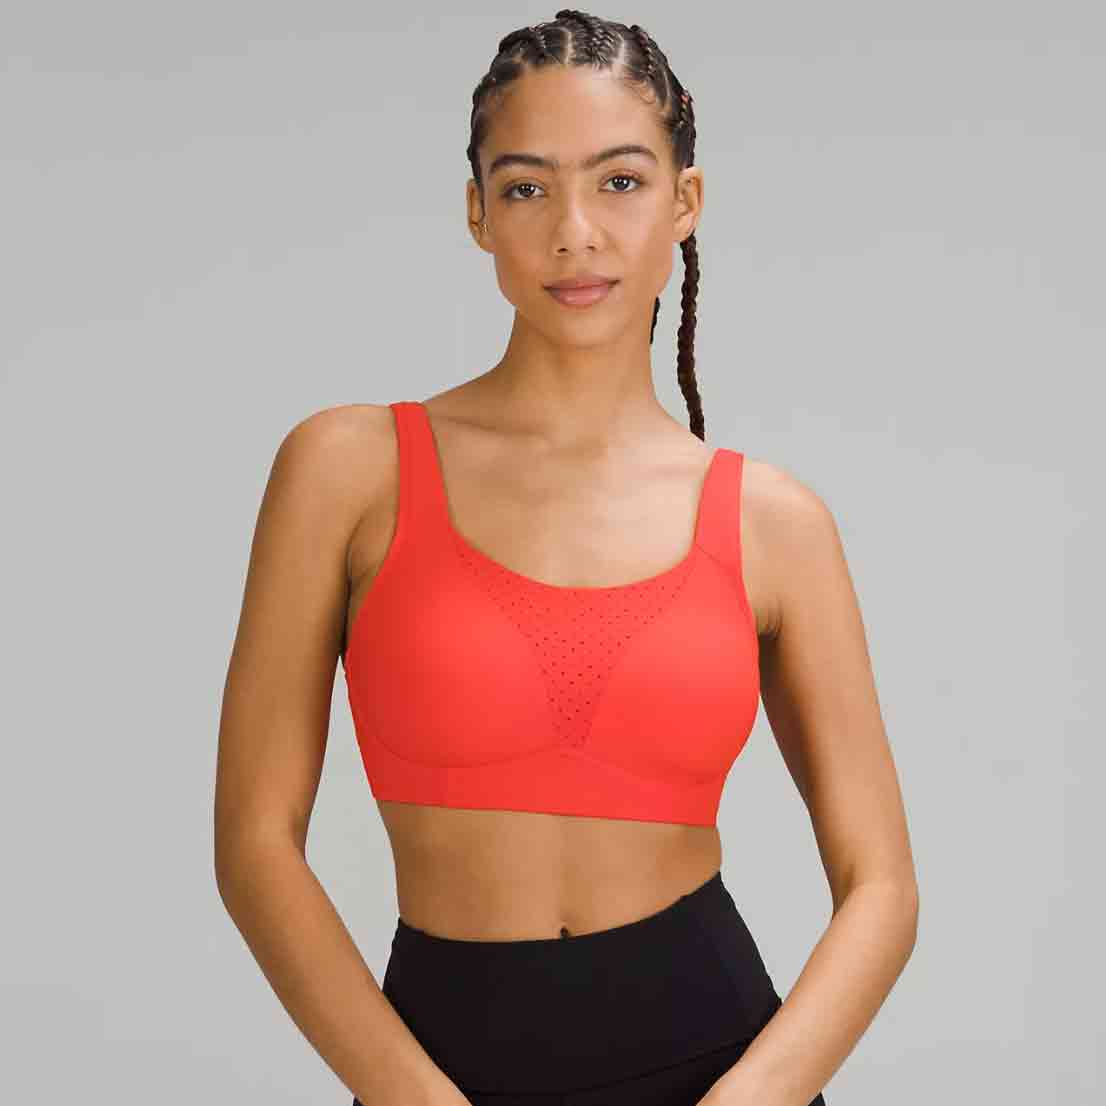 Can this posture-improving sports bra also improve my golf game?